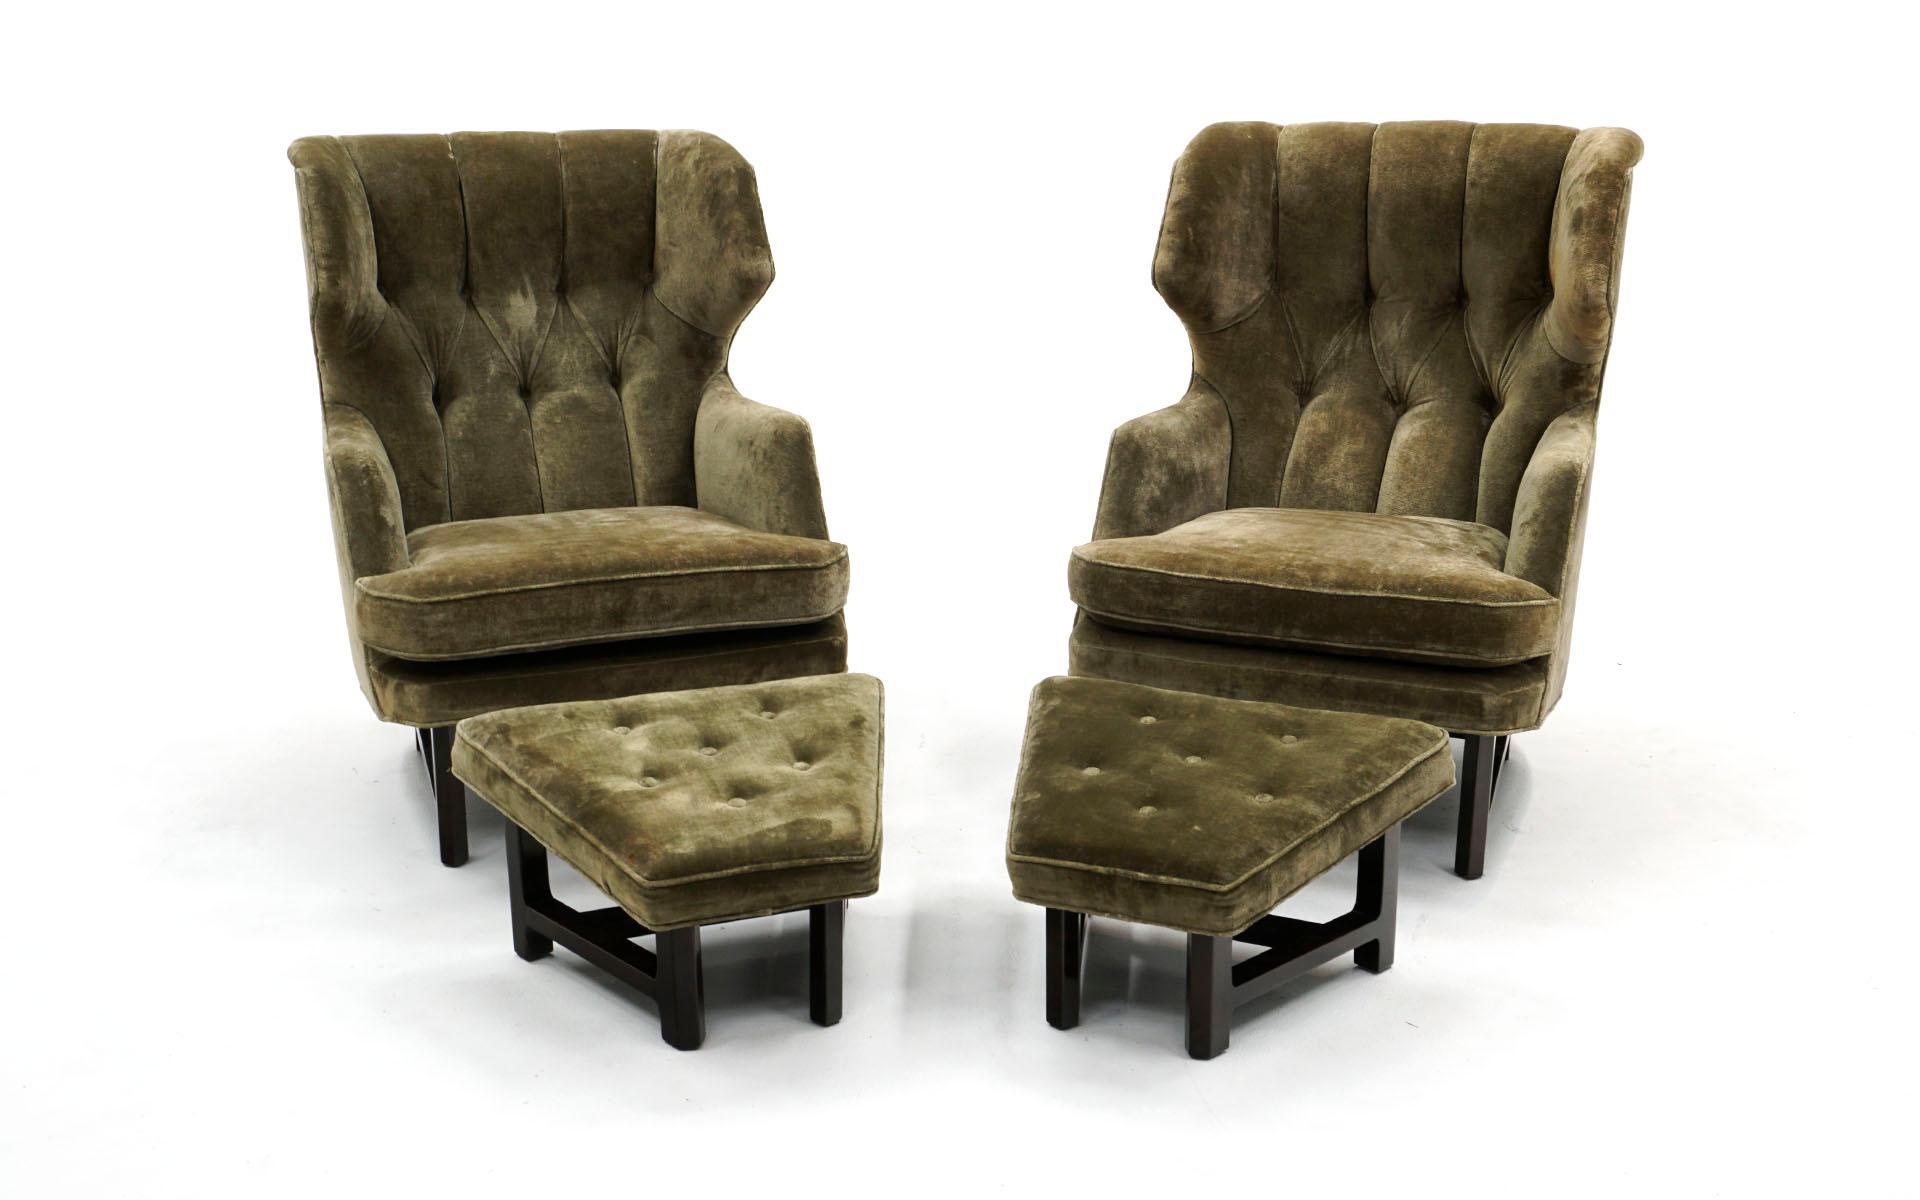 Original pair of tufted back wingback lounge chairs with ottomans designed by Edward Wormley for the Janus Collection produced by Dunbar Furniture Company, 1950's. Two chairs and two ottomans in the original glamorous deep green avocado velvet